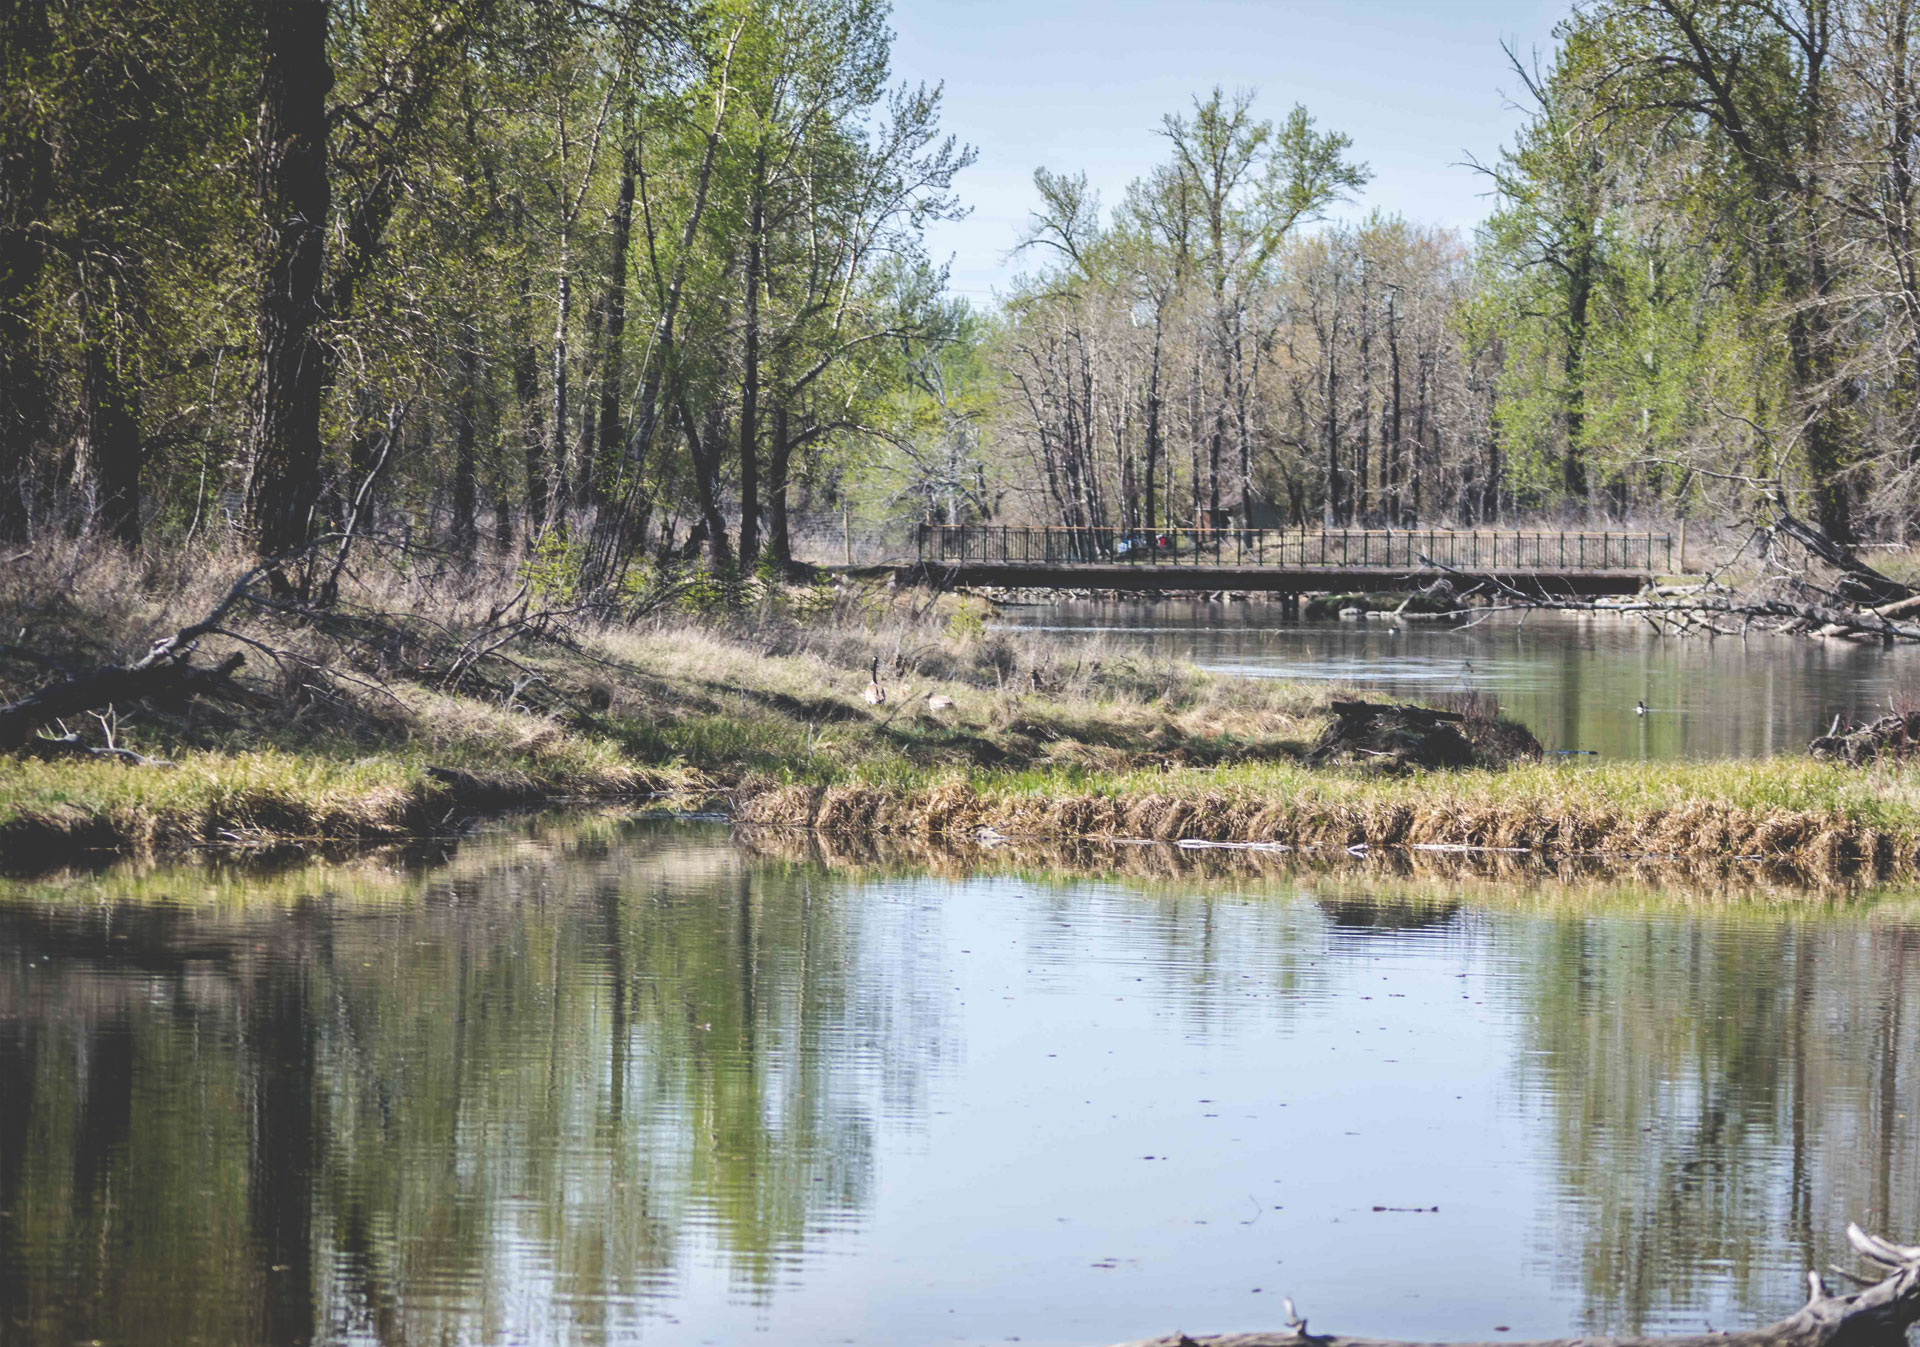 Take a hike through the Inglewood Bird Sanctuary at any point during the year